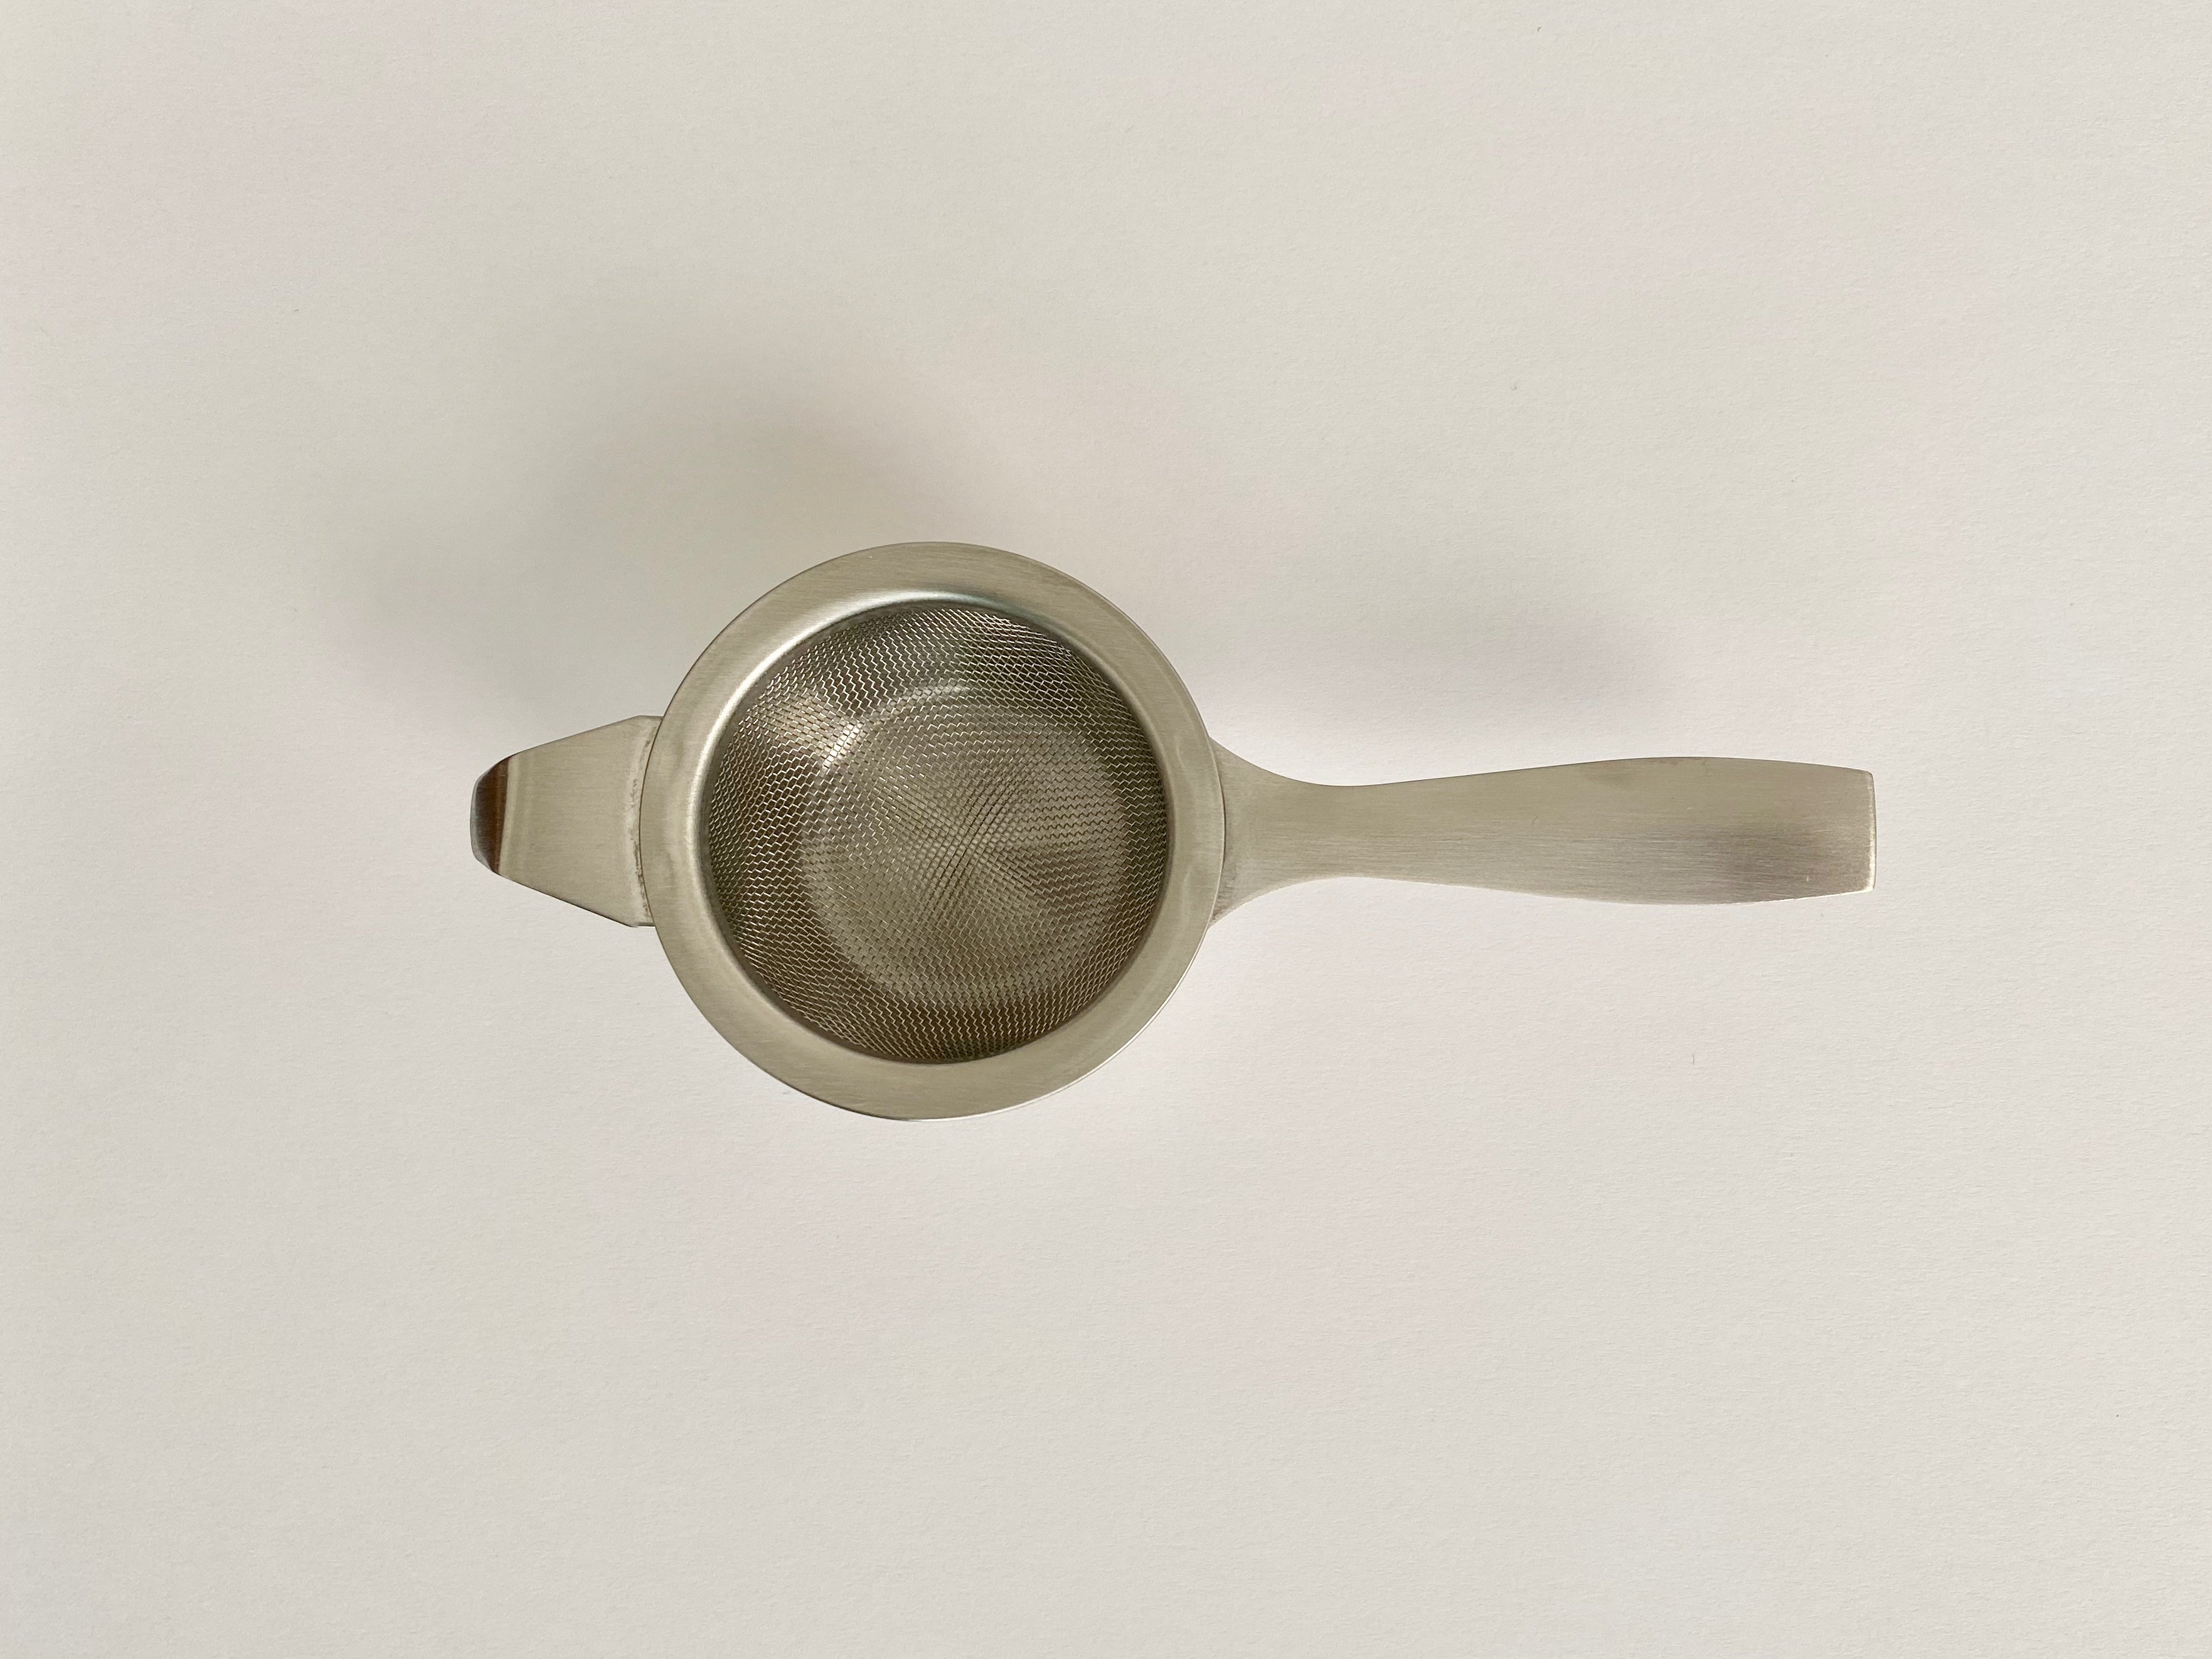 Tea Strainer - Stainless Steel with drip tray